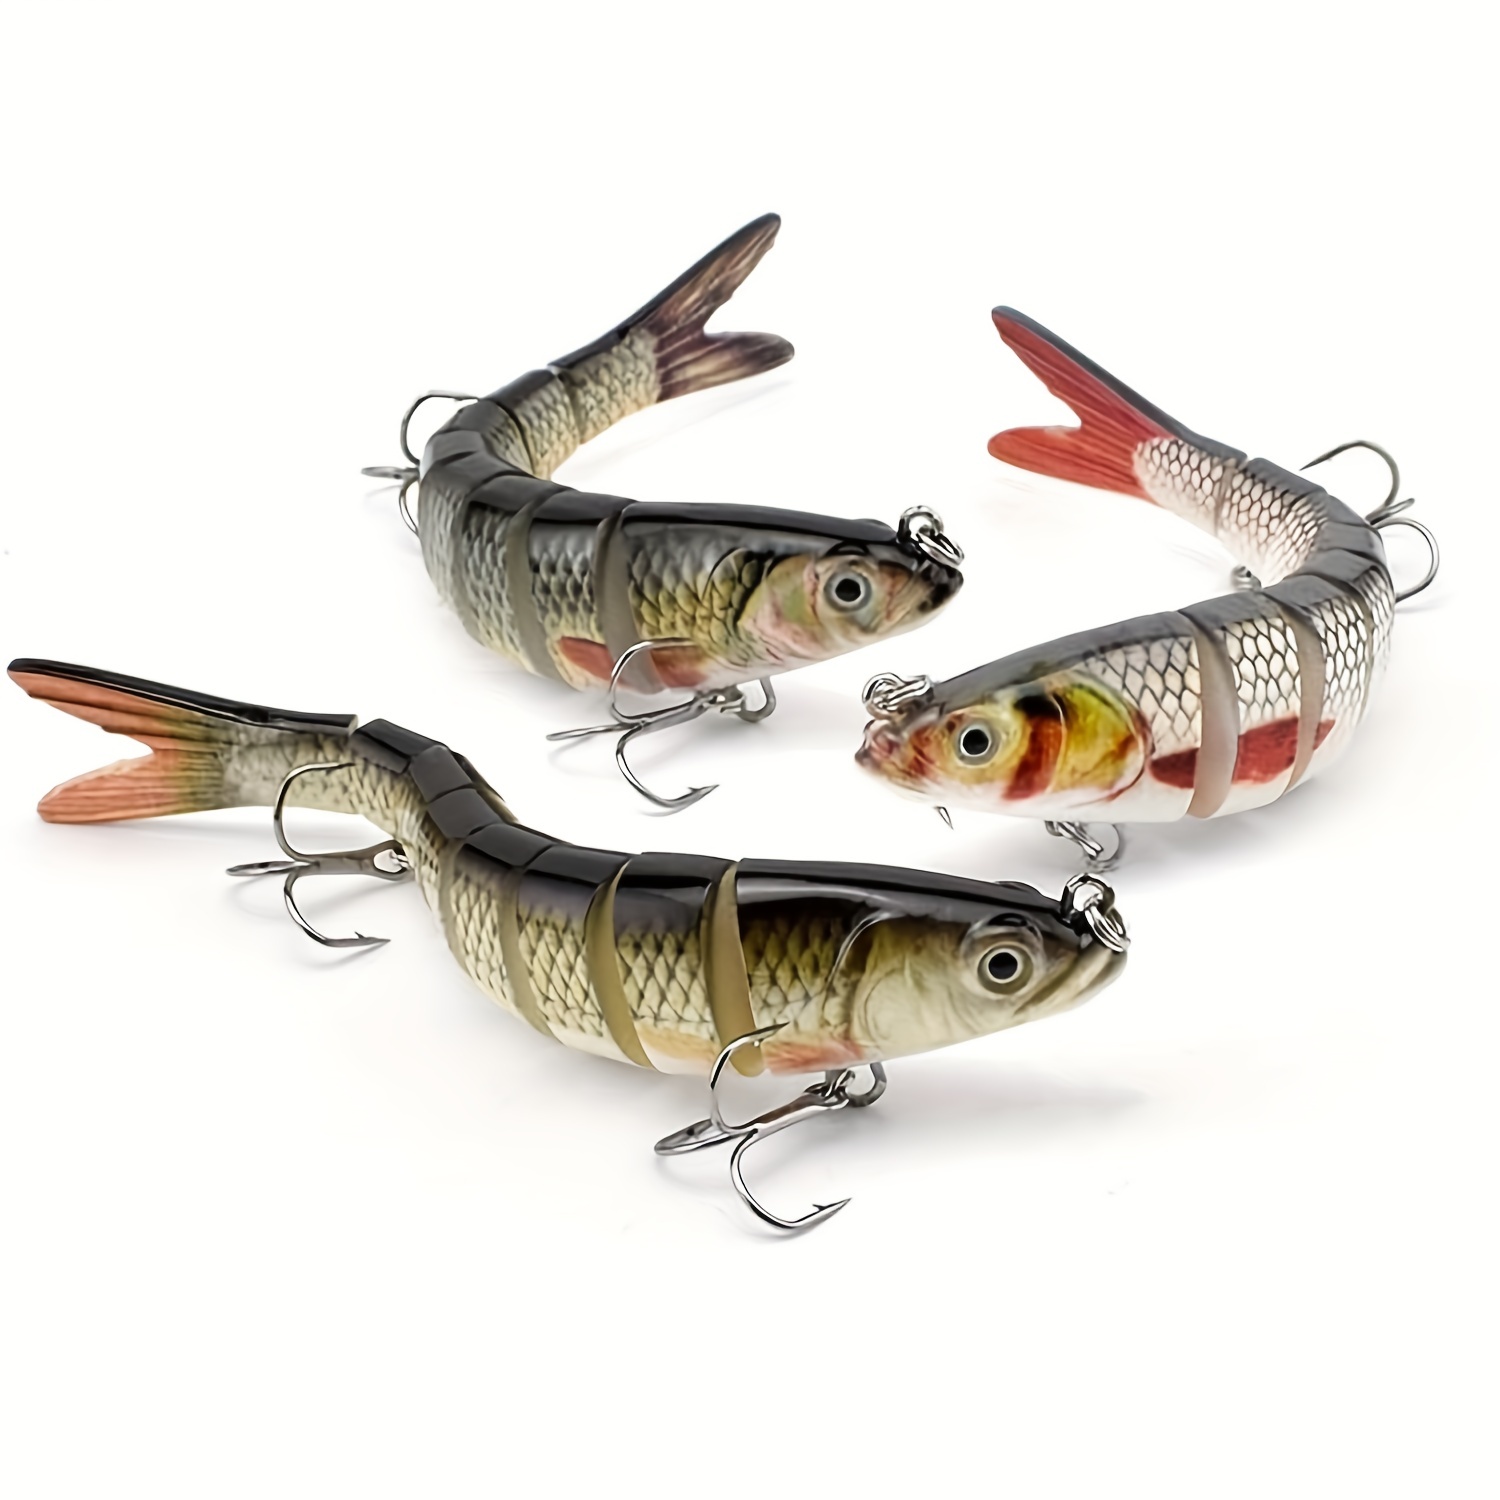 

3pcs 10cm/3.9in Artificial Bionic Sinking Fishing Lure, 10.7g/0.38oz Multi Sections Wobbler Hard Bait For Bass, Fishing Tackle